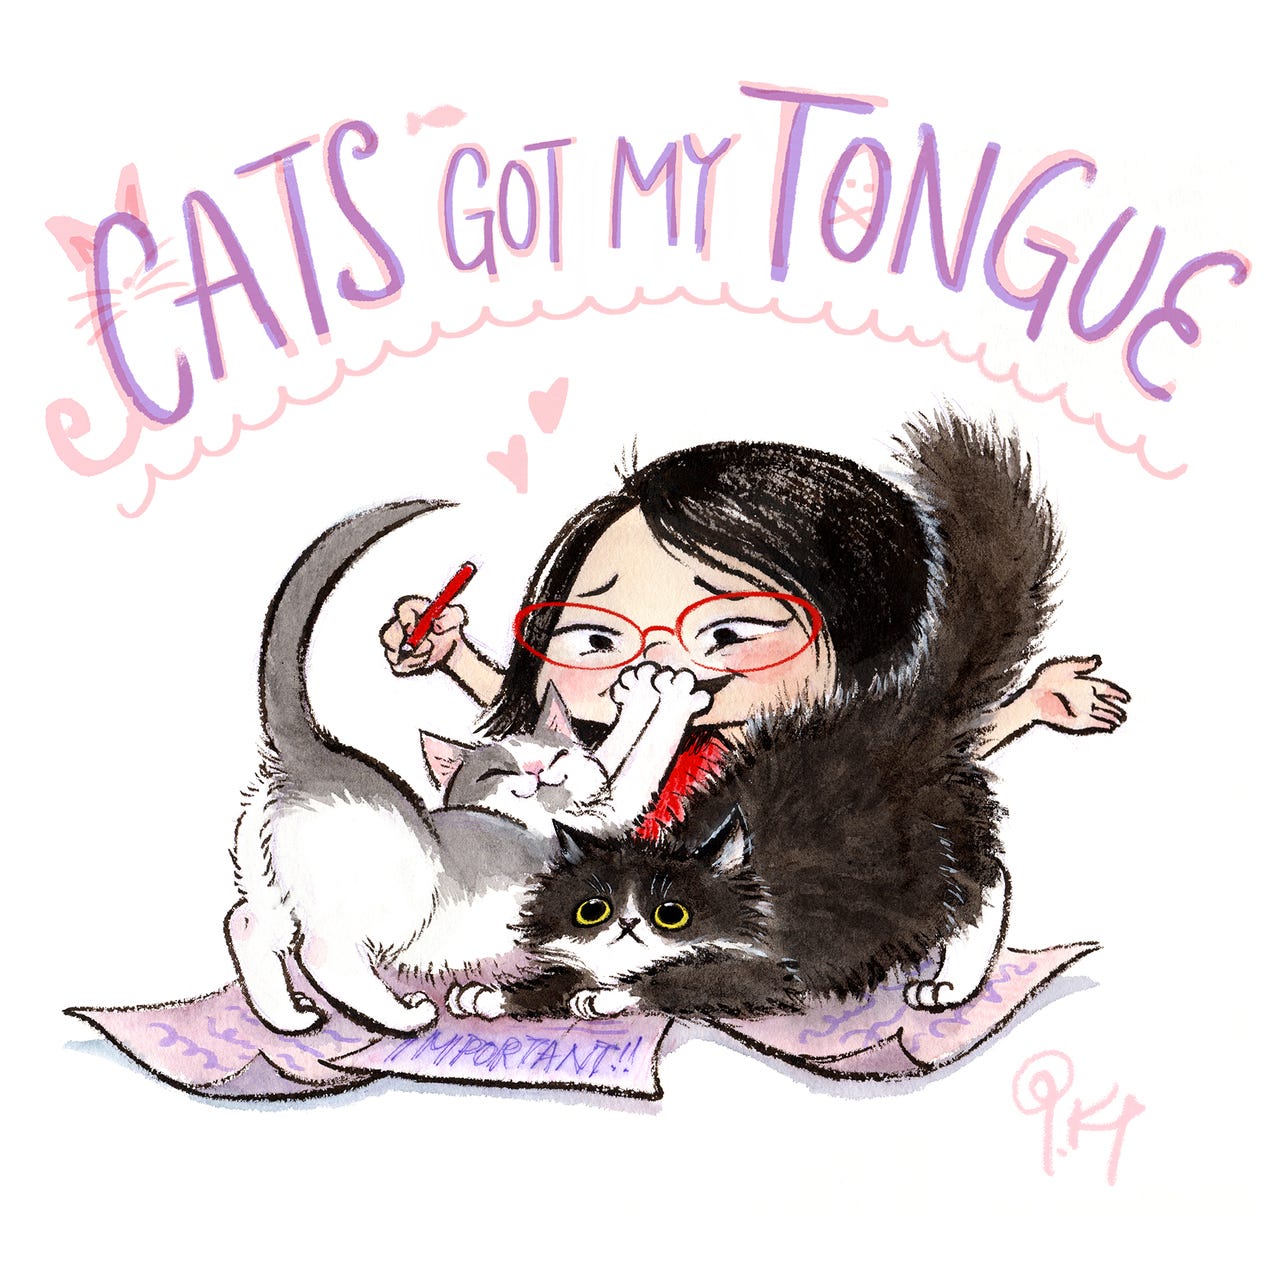 Artwork for Cats Got My Tongue